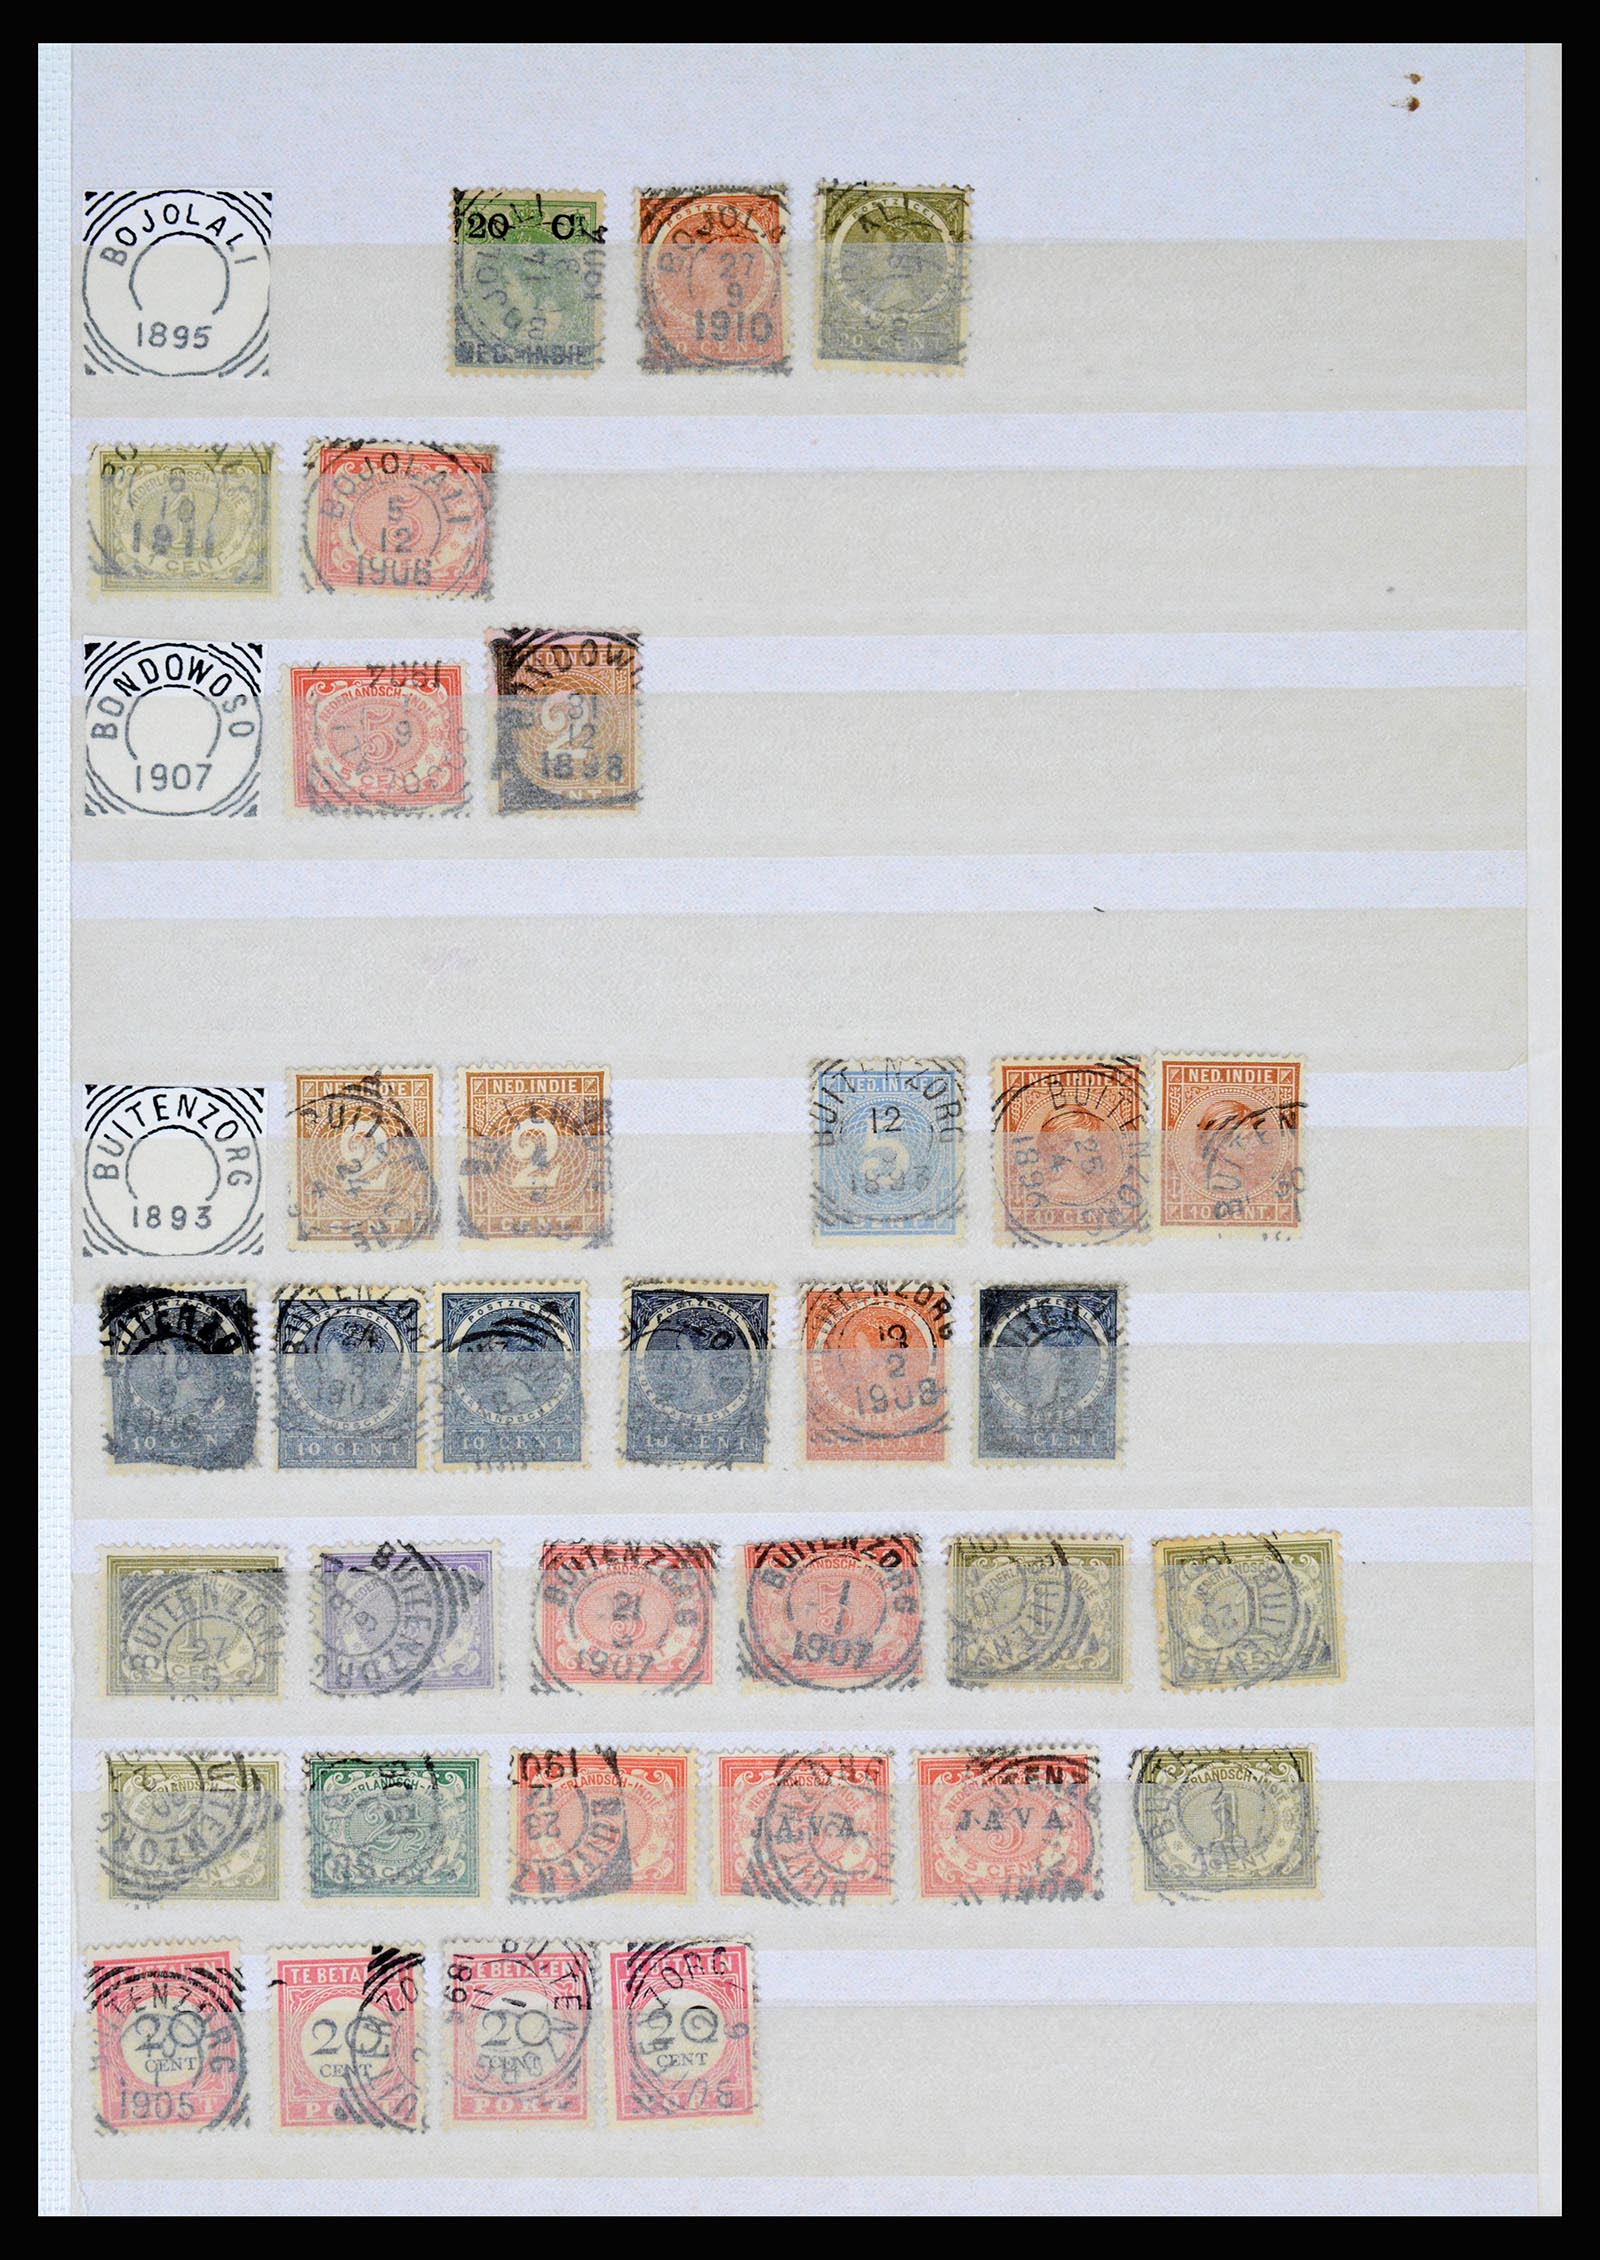 36839 066 - Stamp collection 36839 Dutch east Indies square cancels.